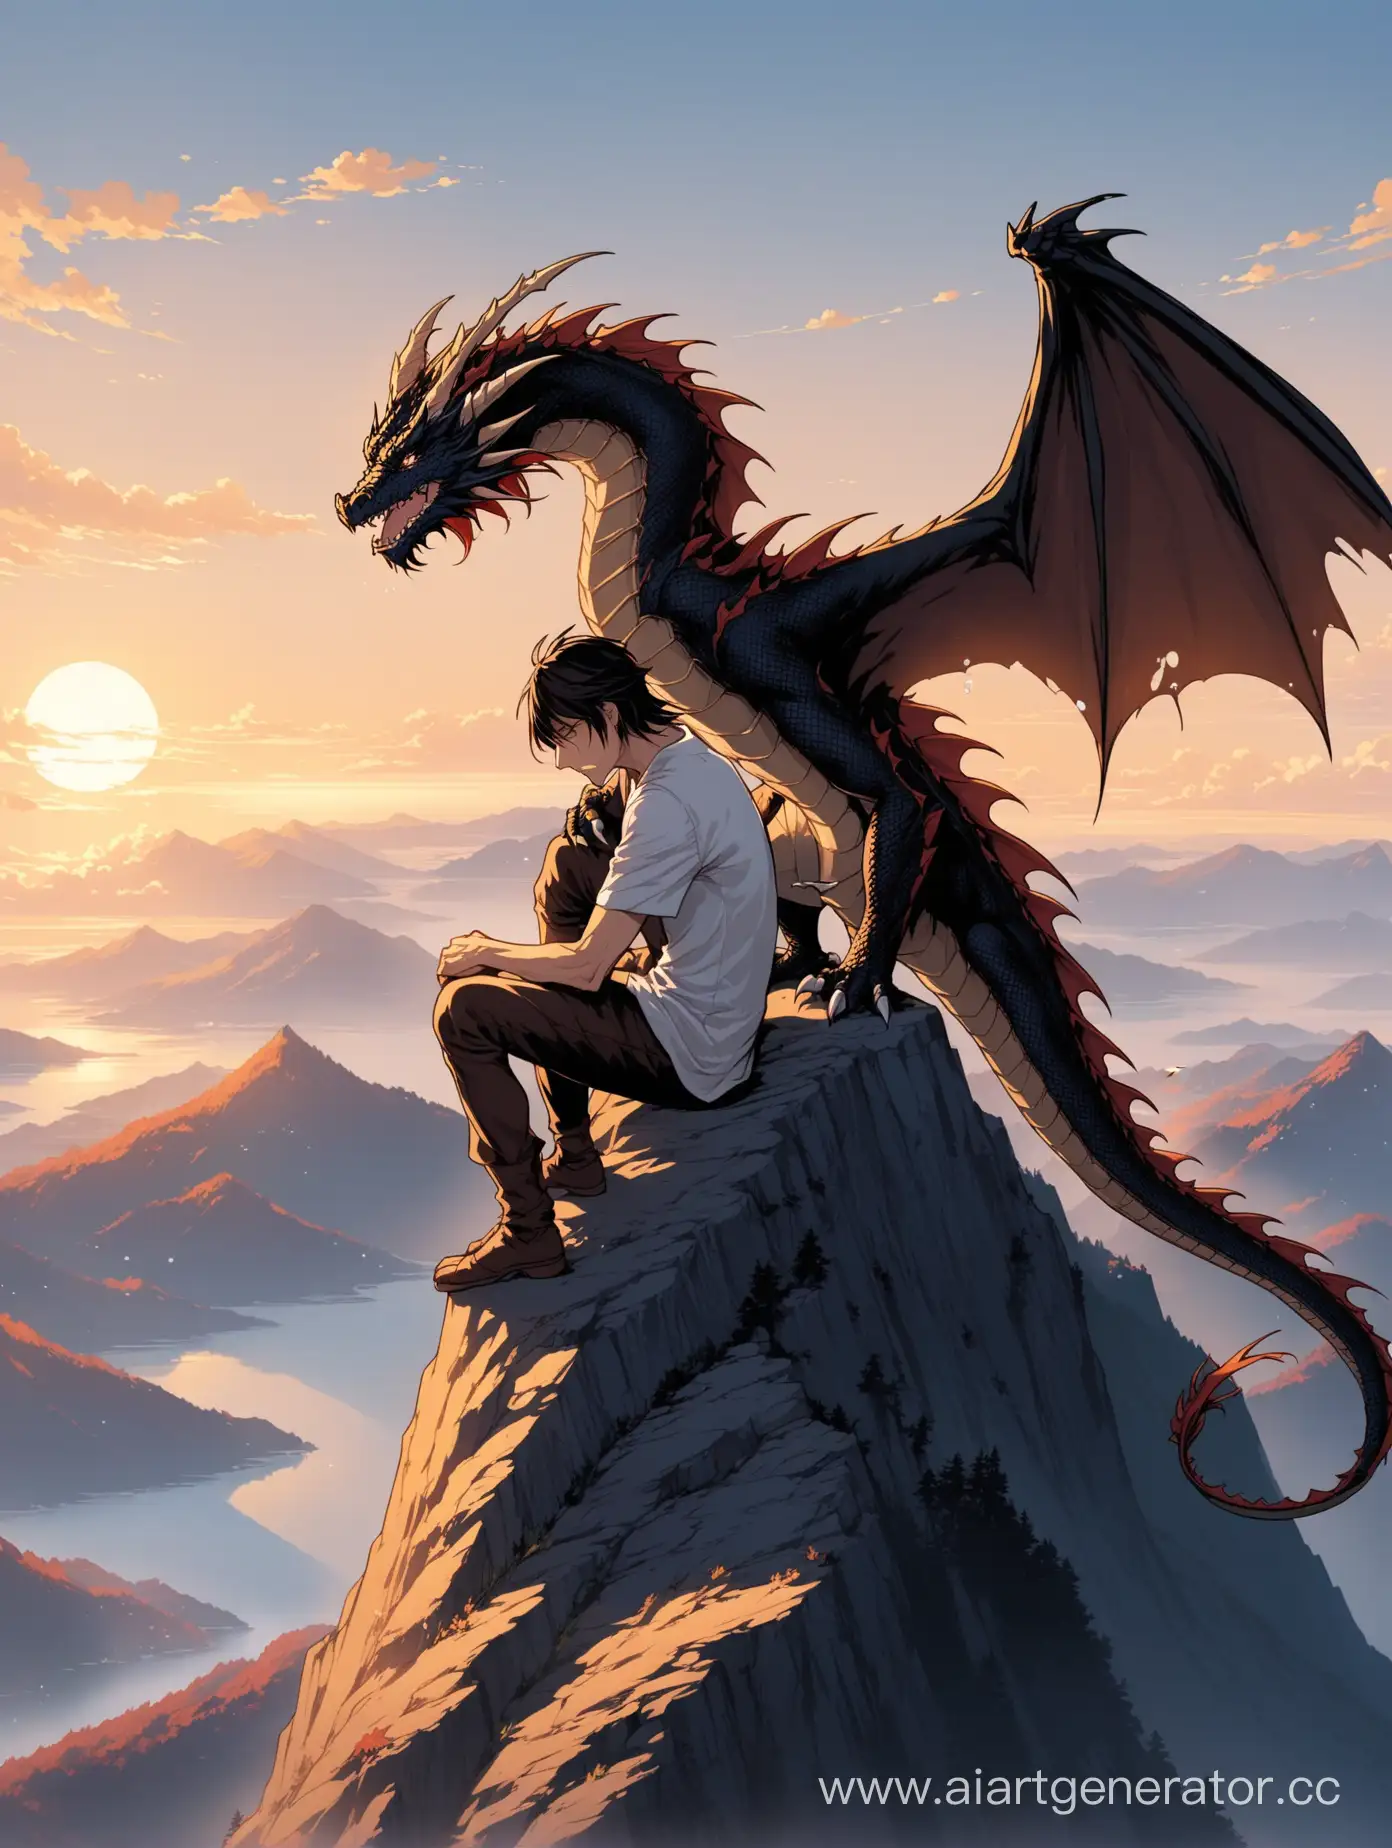 Half-human half-dragon siting on a edge of a mountain crying and holding his shoulder